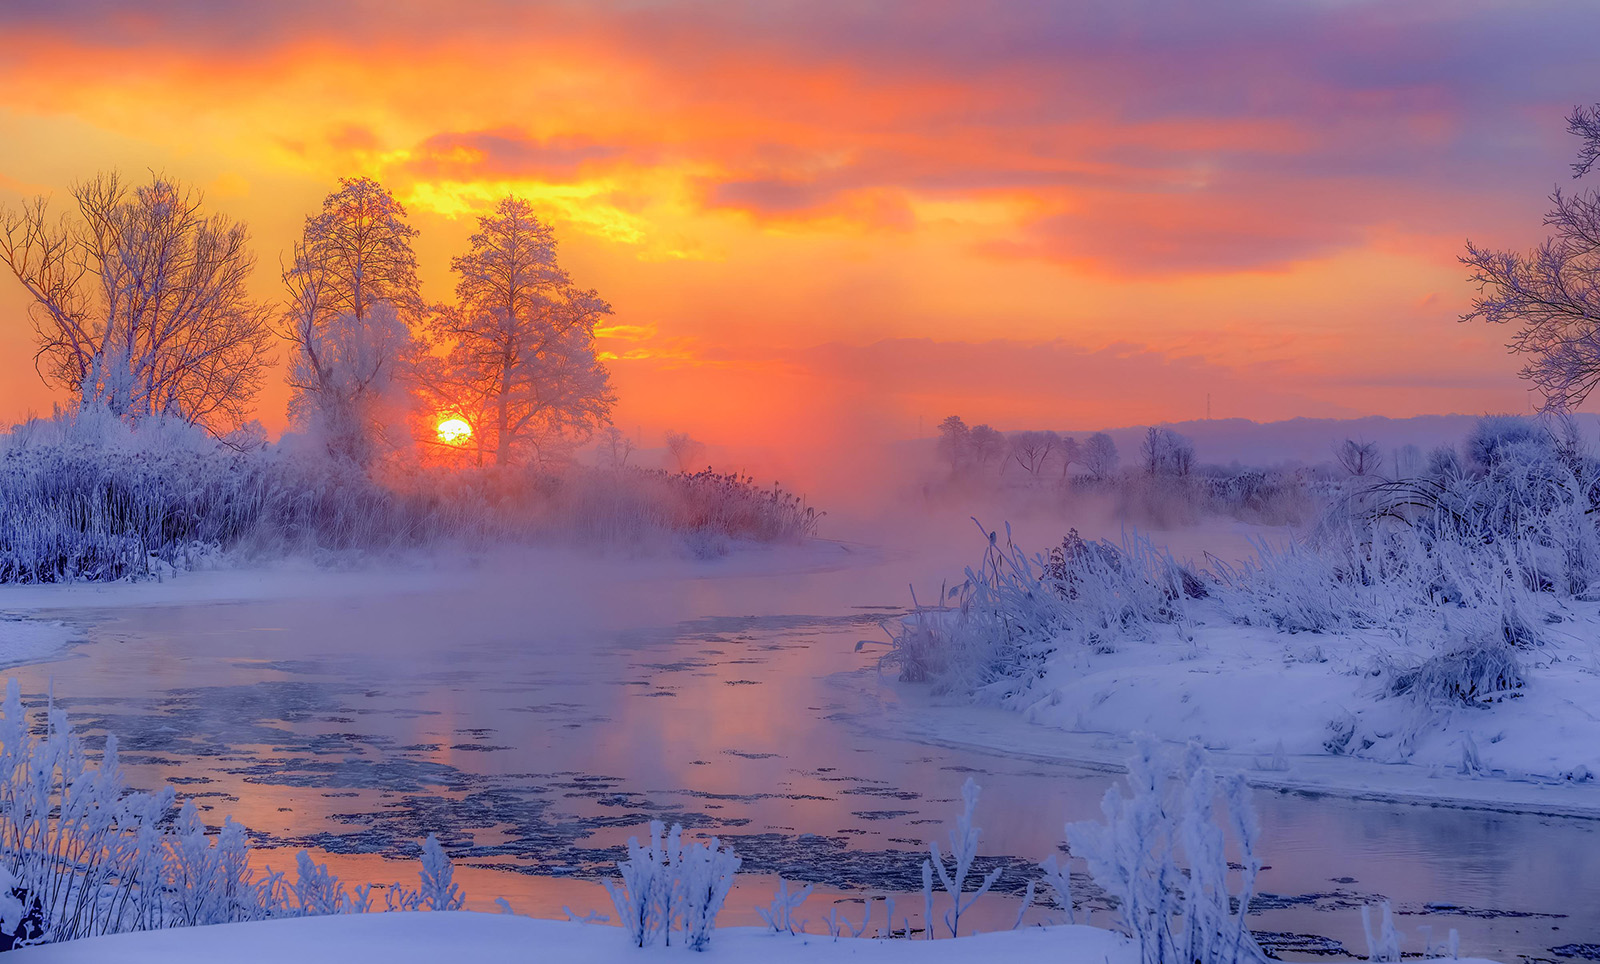 Krzysztof Tollas - Frosty Winter Sunrise Over the Gwda River